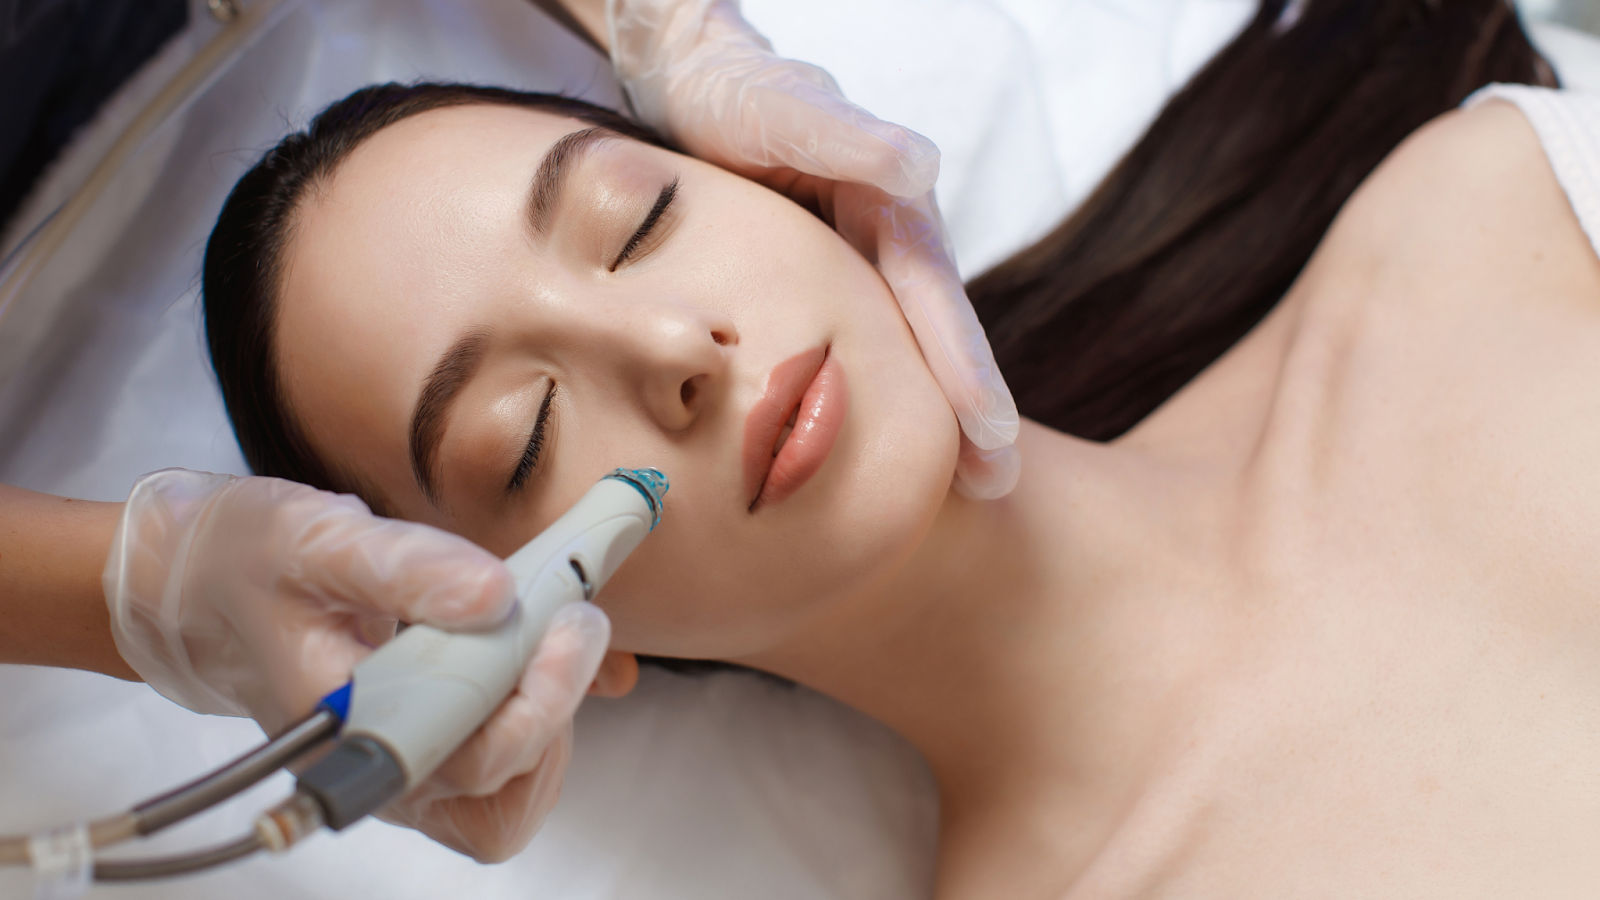 What Do I Need To Know Before Getting HydraFacial